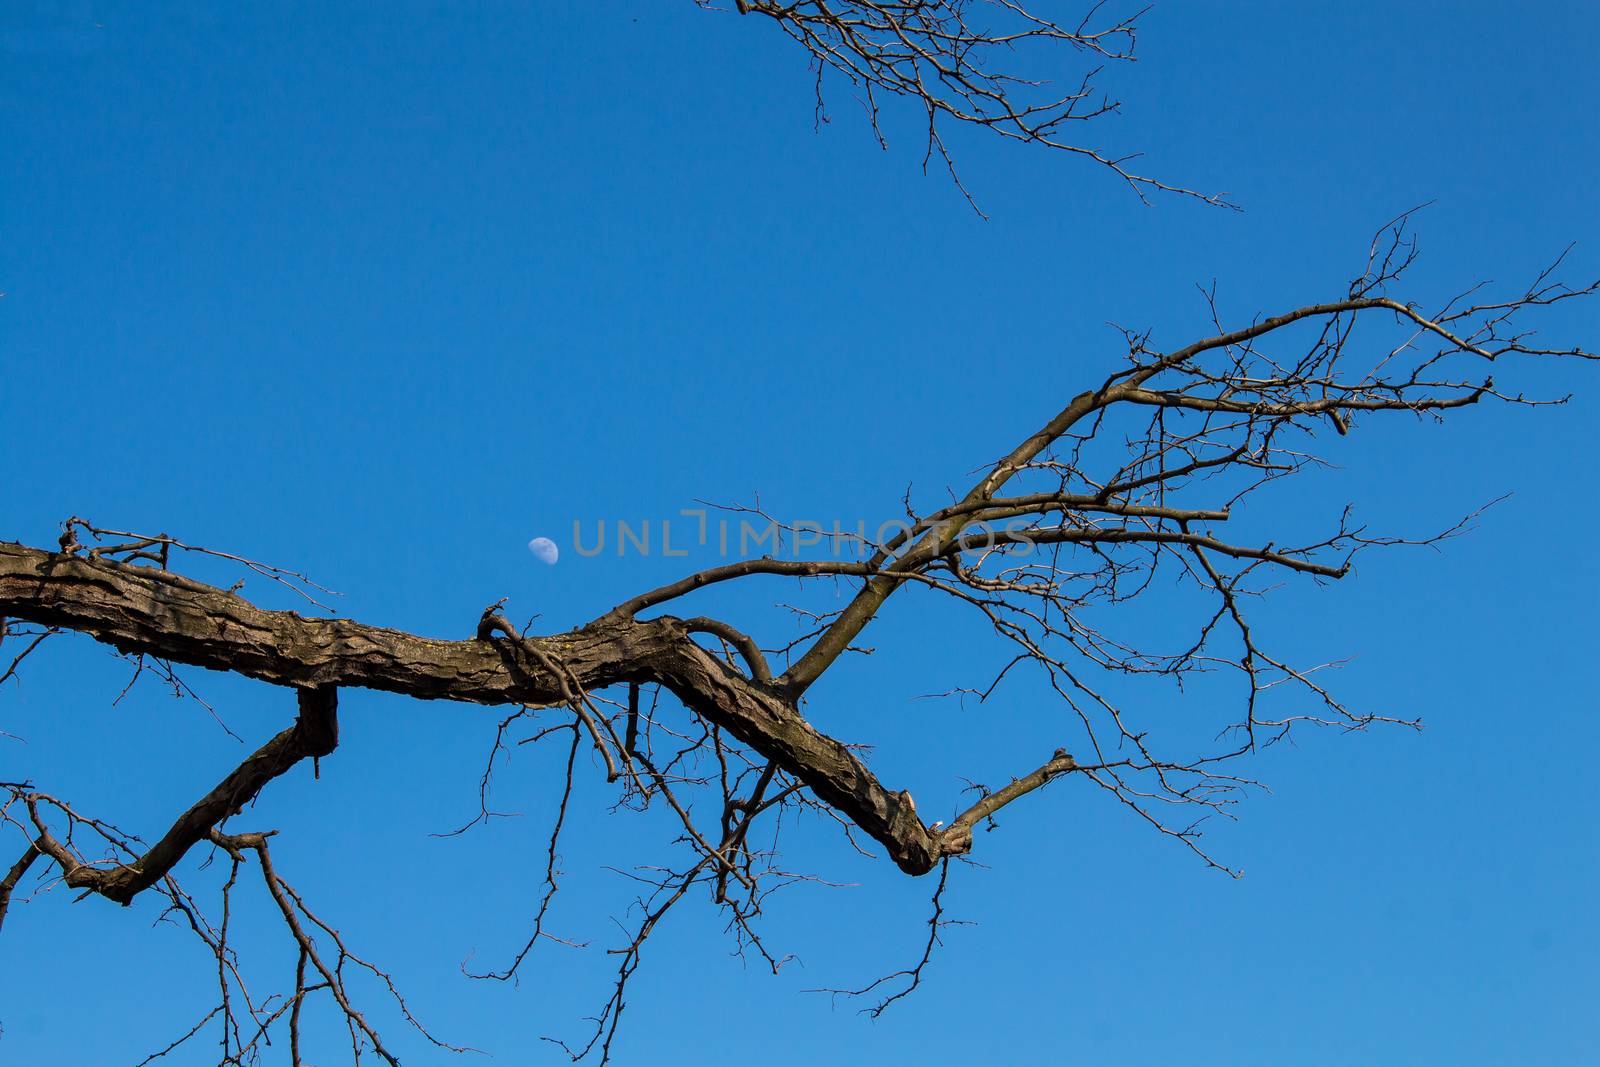 Bright blue sky as a background of a twig in the later winter, still without leaves. Moon on the sky.